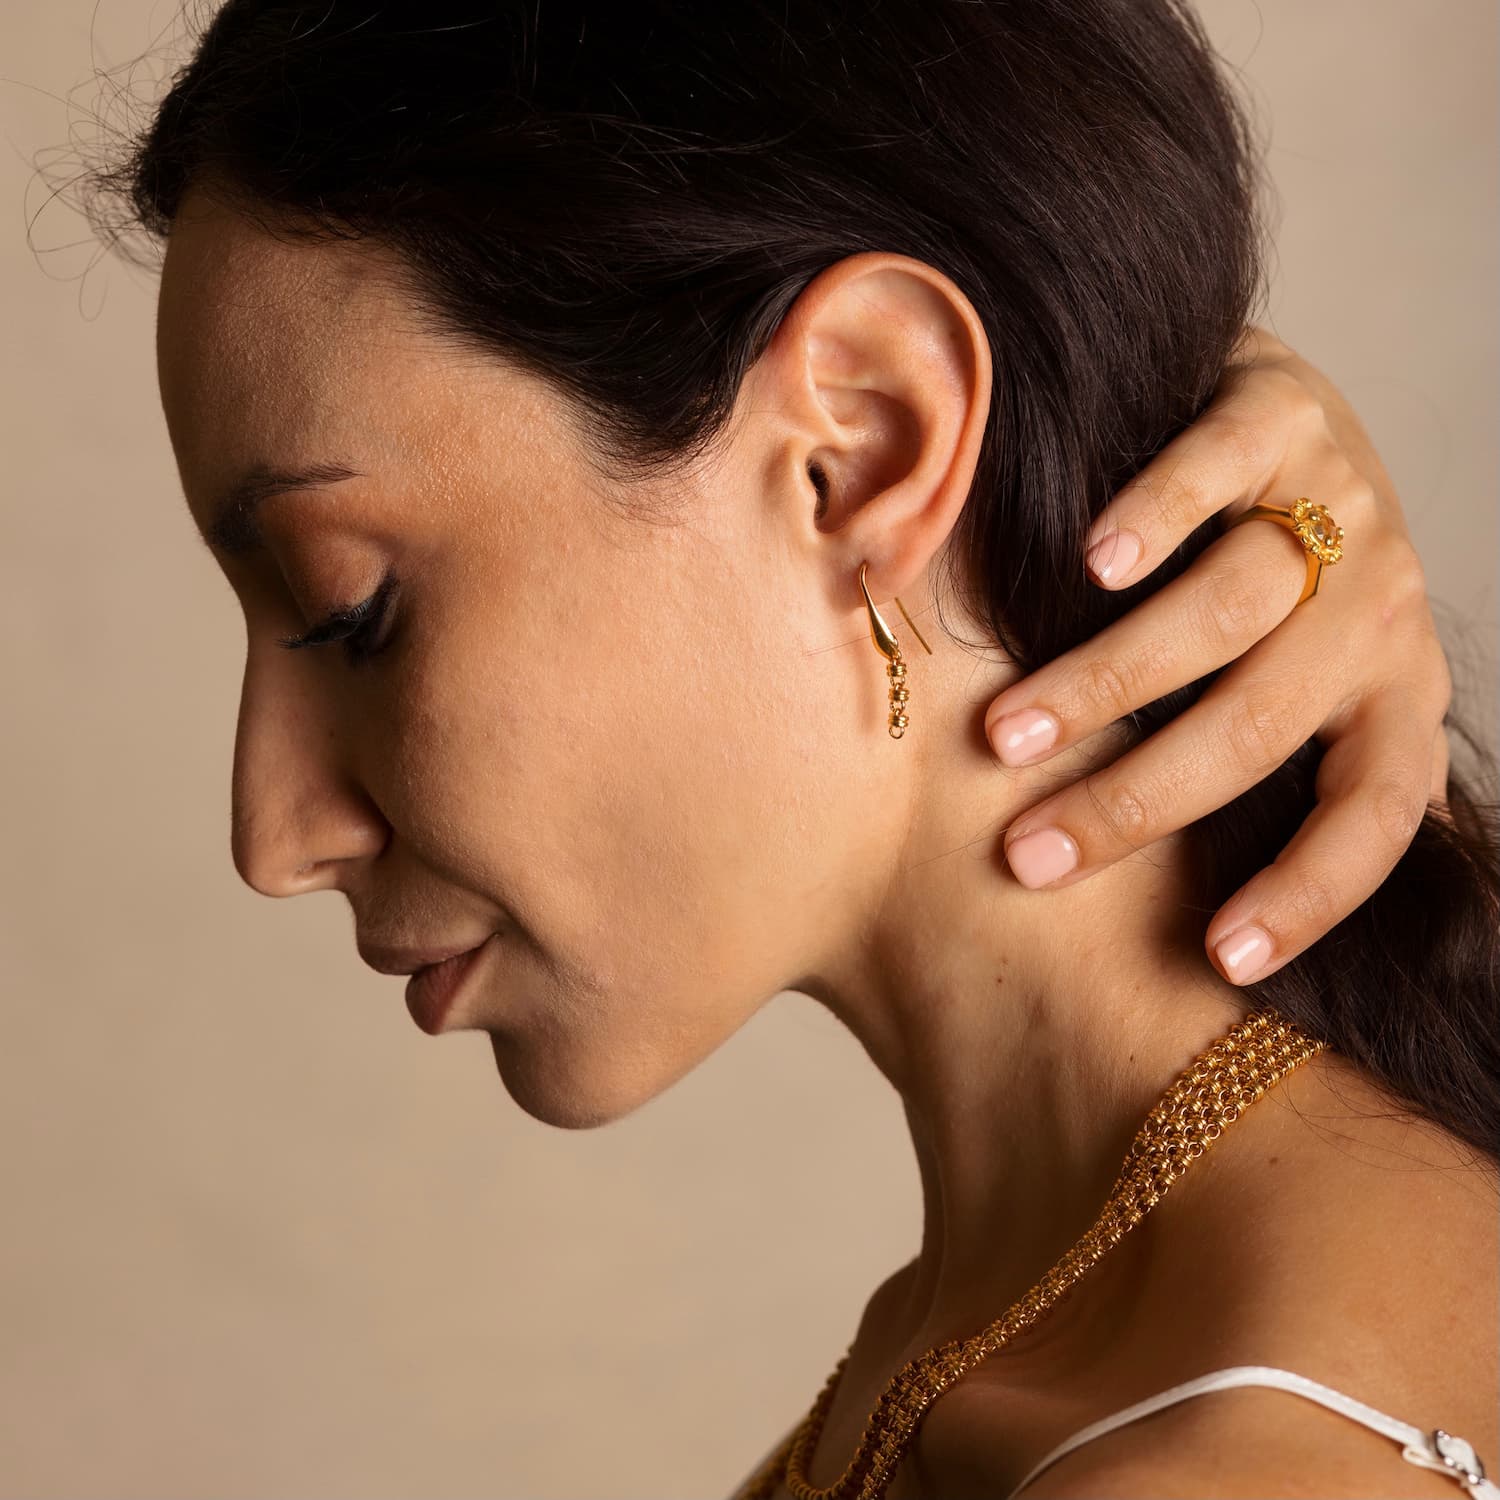 A model holding her hair back to show four gold chains with matching gold chain earrings and a gold ring in the same iconic chain design around a semi-precious gemstone. All hand-crafted Italian jewelry is made by DelBrenna Italian Jewelers in Tuscany. 